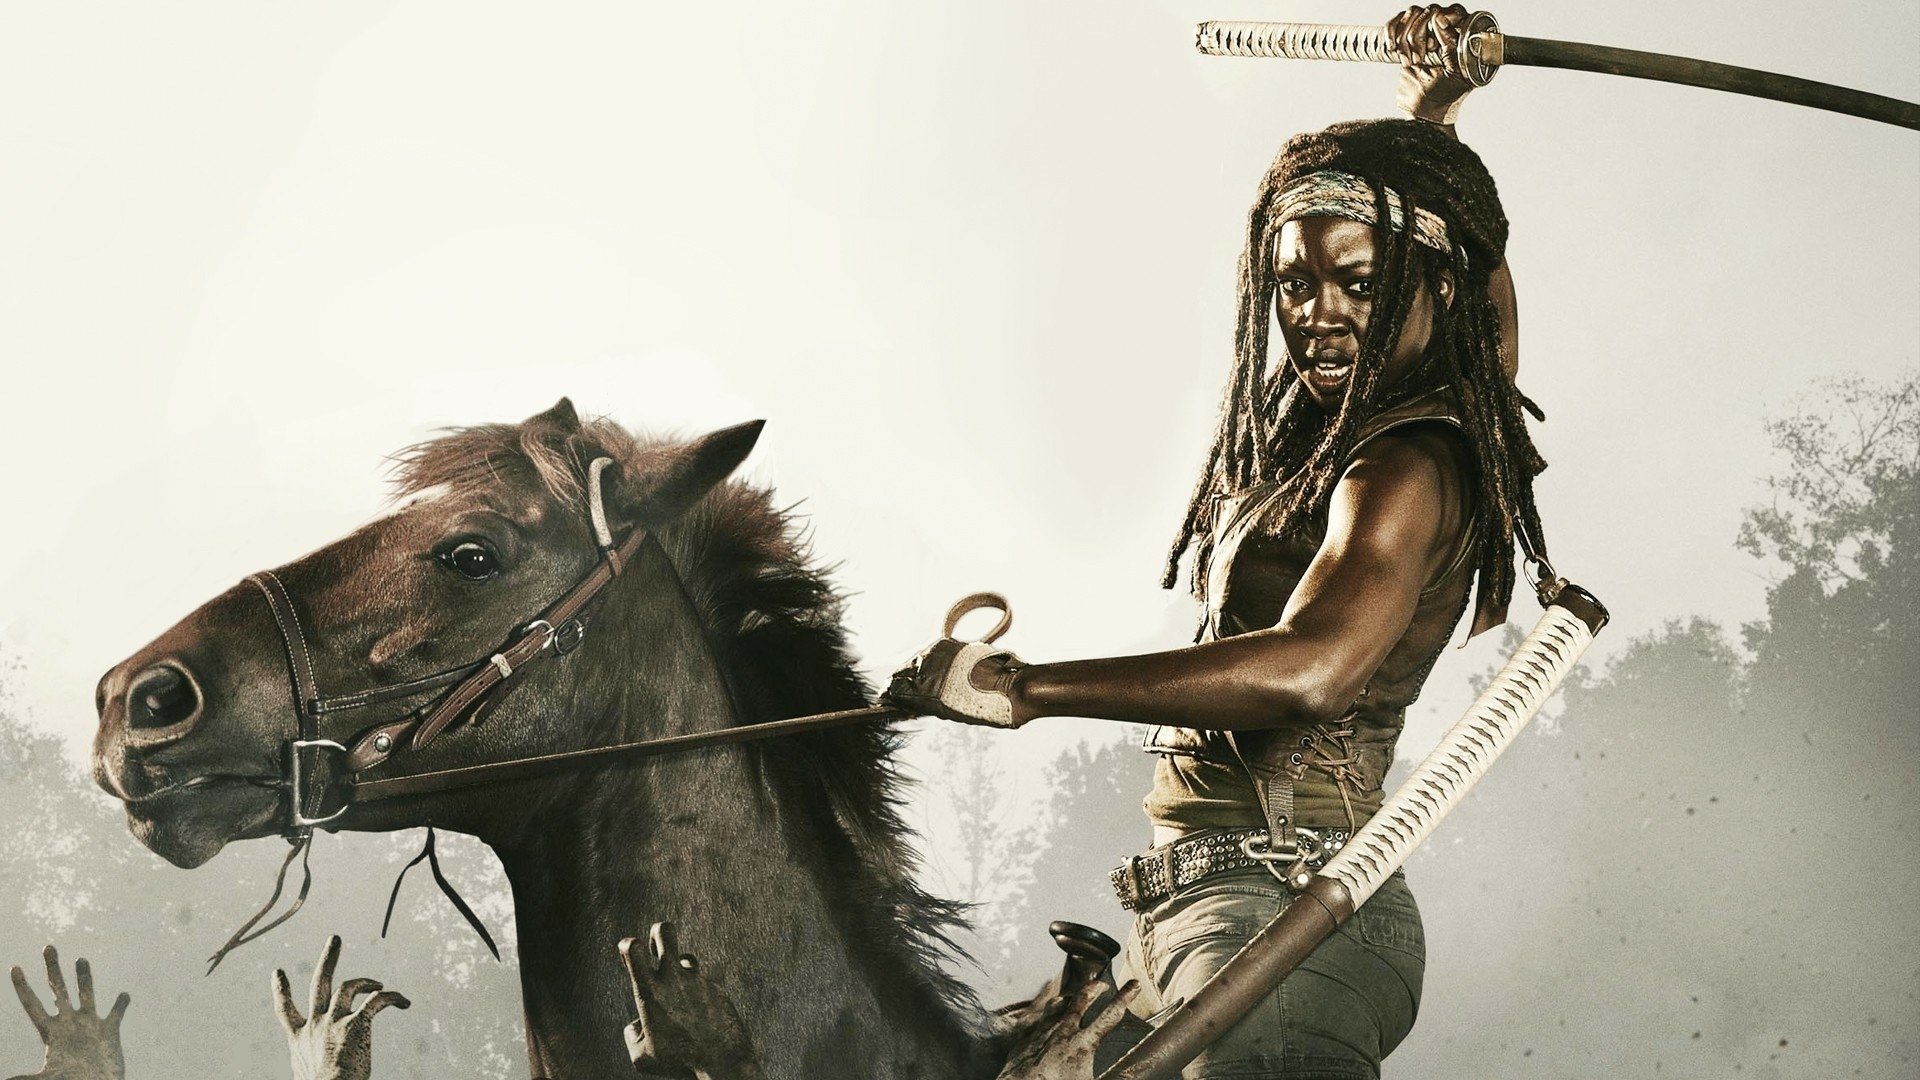 72 Michonne The Walking Dead Hd Wallpapers Background Images Images, Photos, Reviews